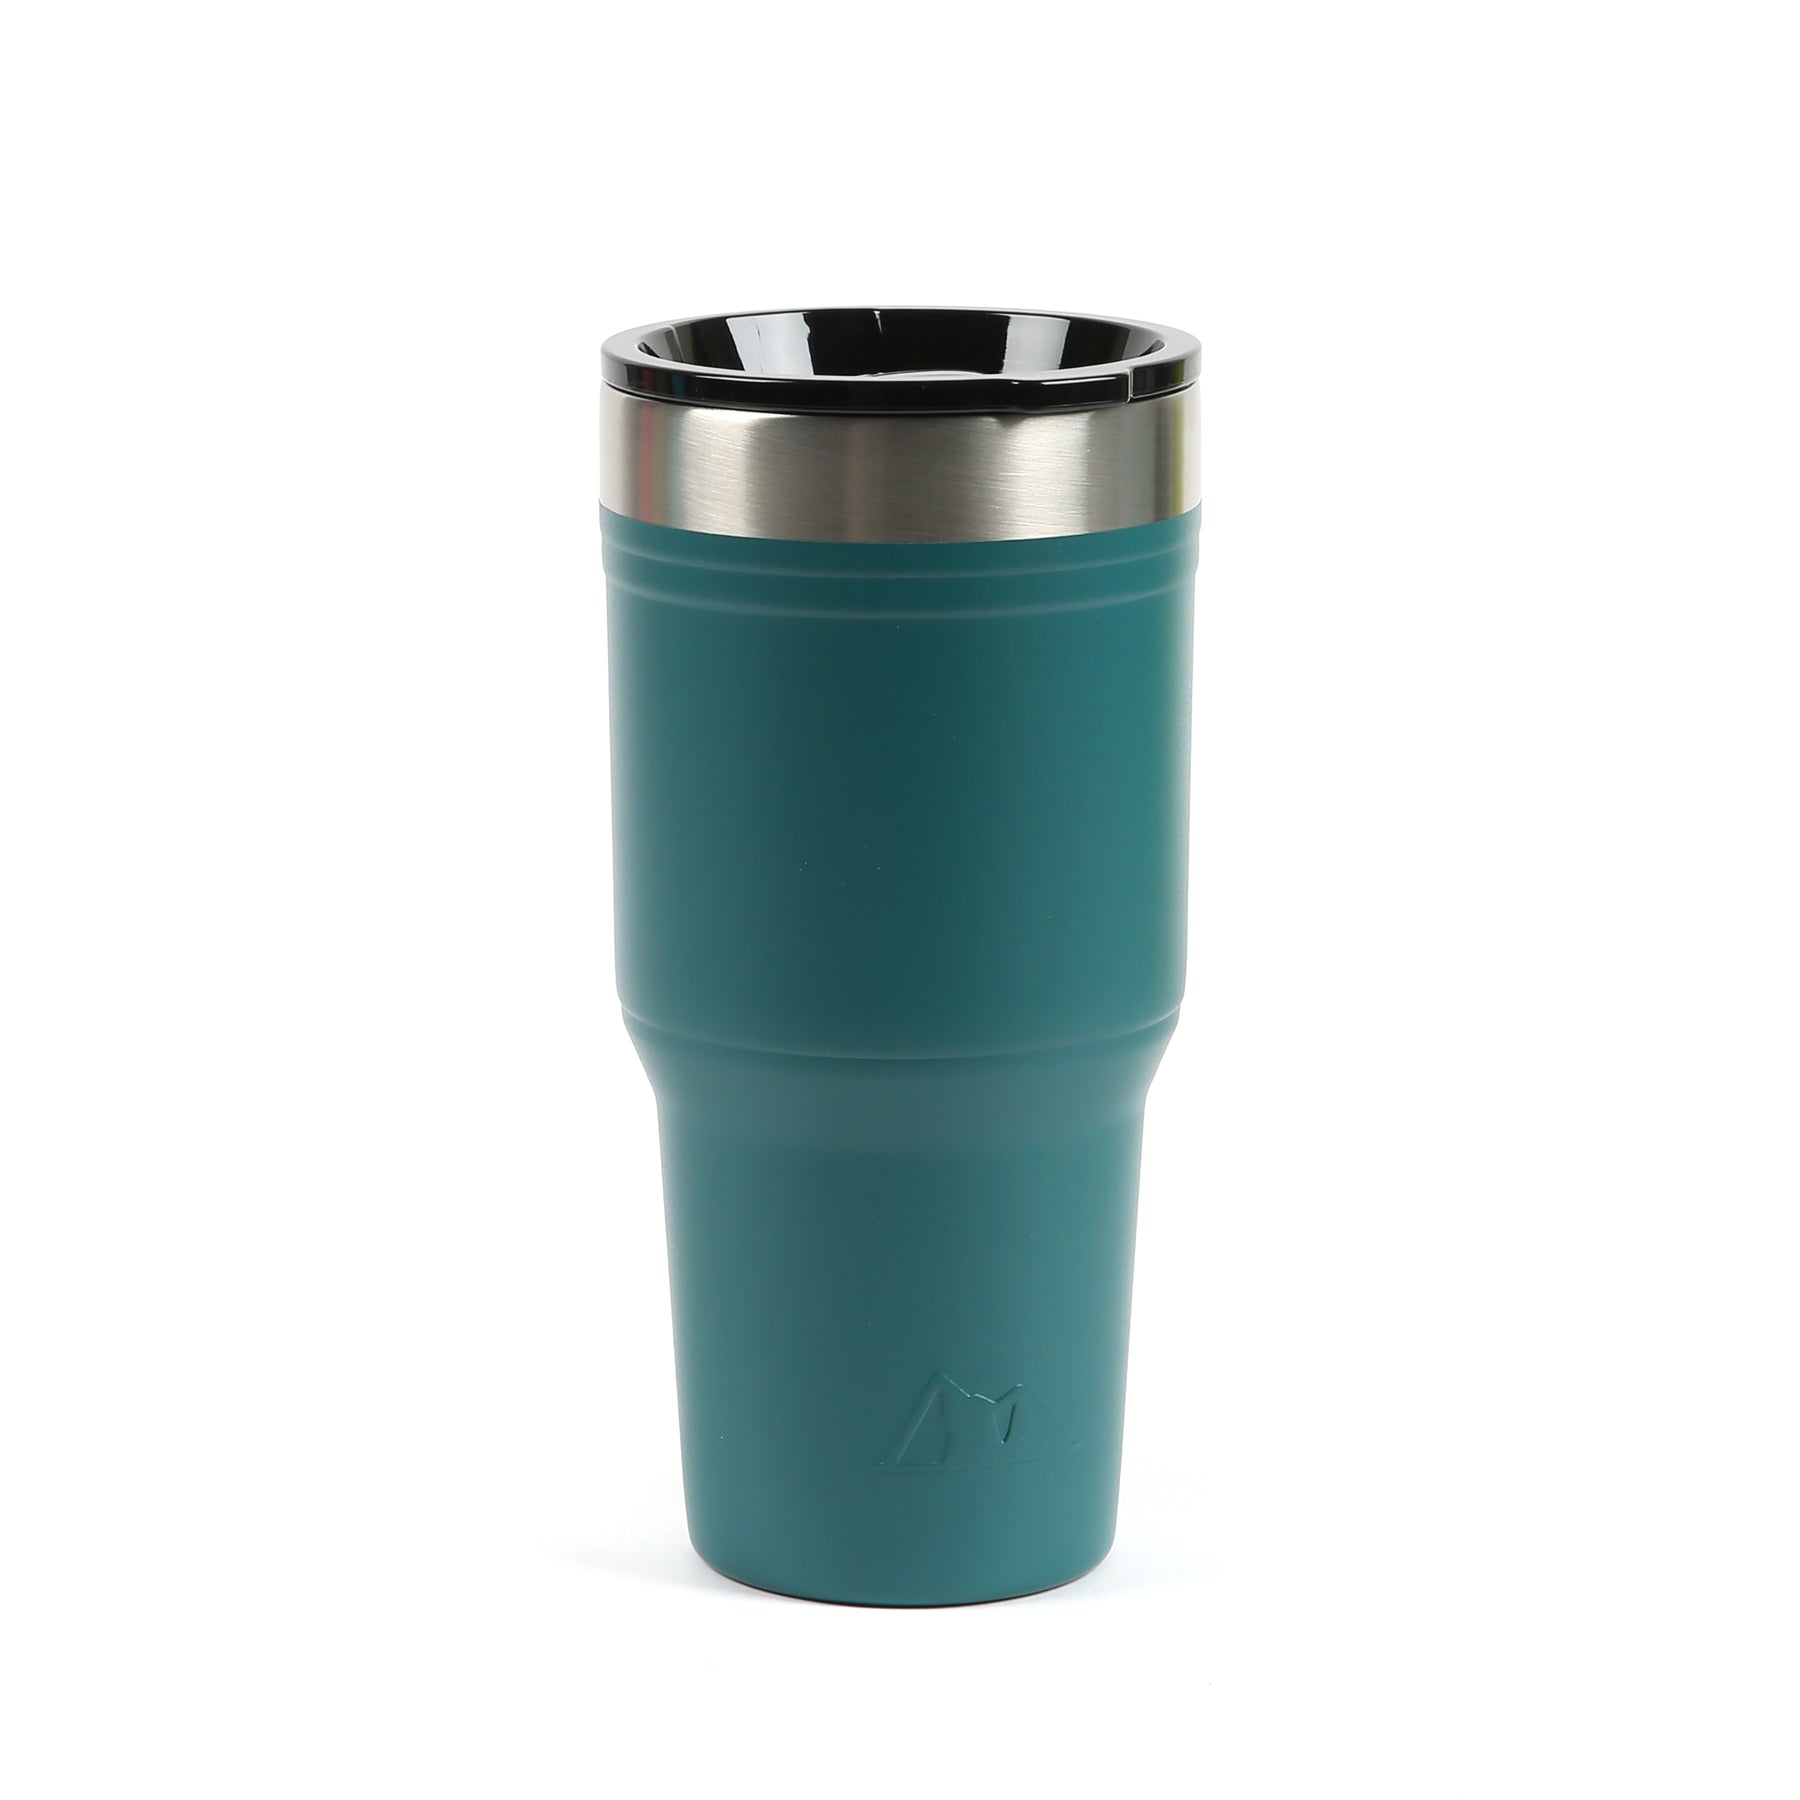 Serpentine Short Tumbler in Green - 12 oz - Set of 6 – Orion's Table